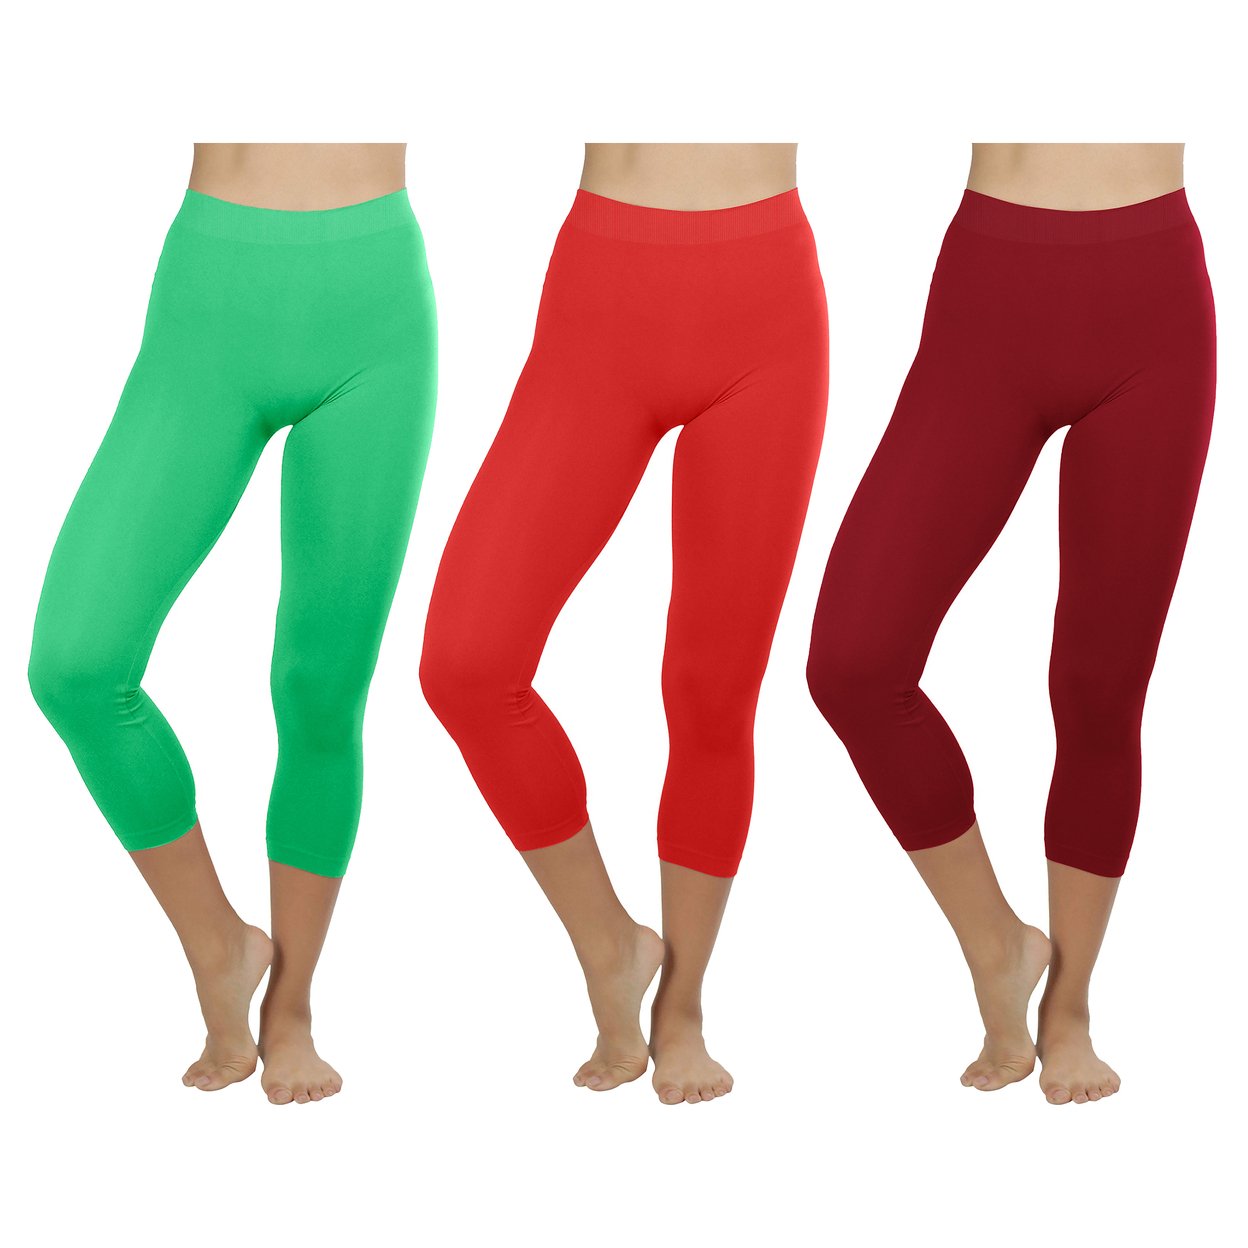 Women's Ultra Soft High Waisted Smooth Stretch Active Yoga Capri Leggings - Red, Small